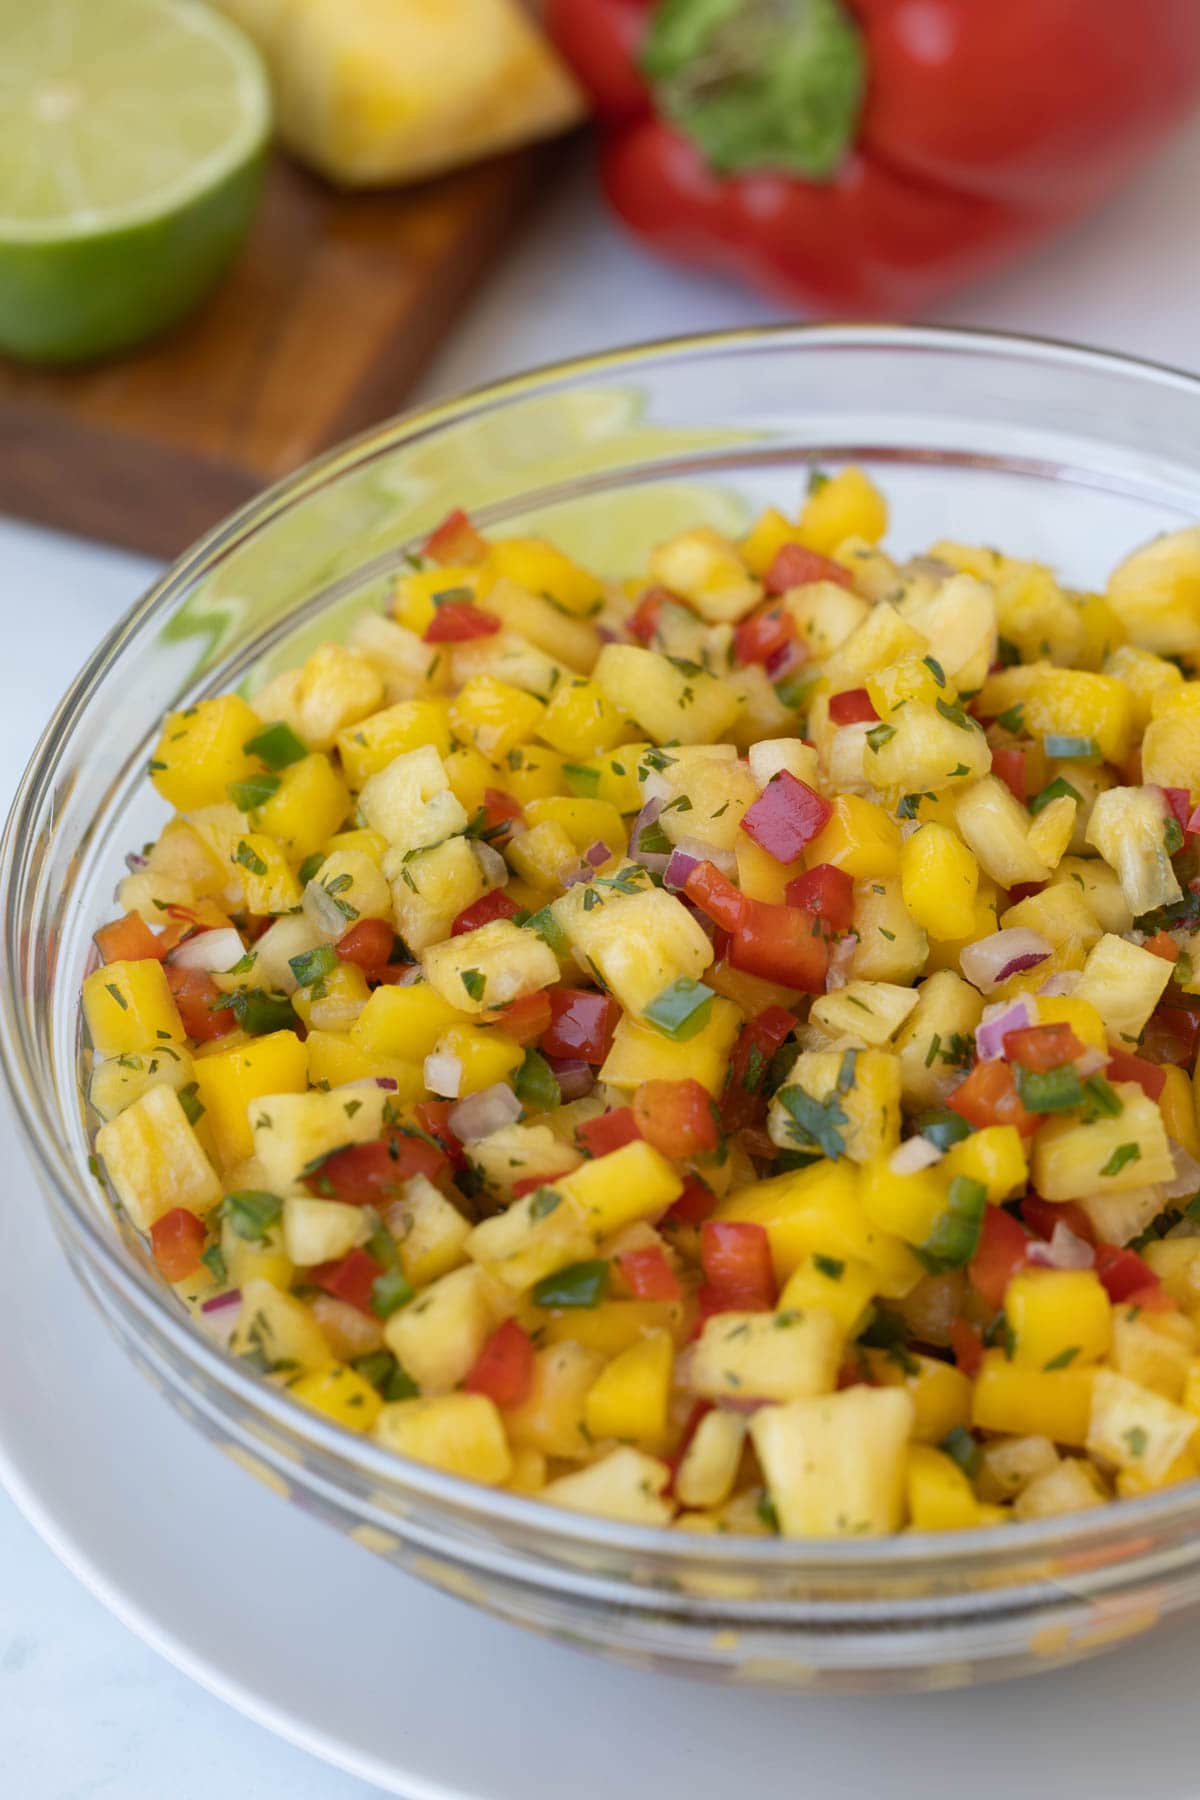 A glass bowl of tropical fruit salsa with pineapple, mango, peppers, and herbs.